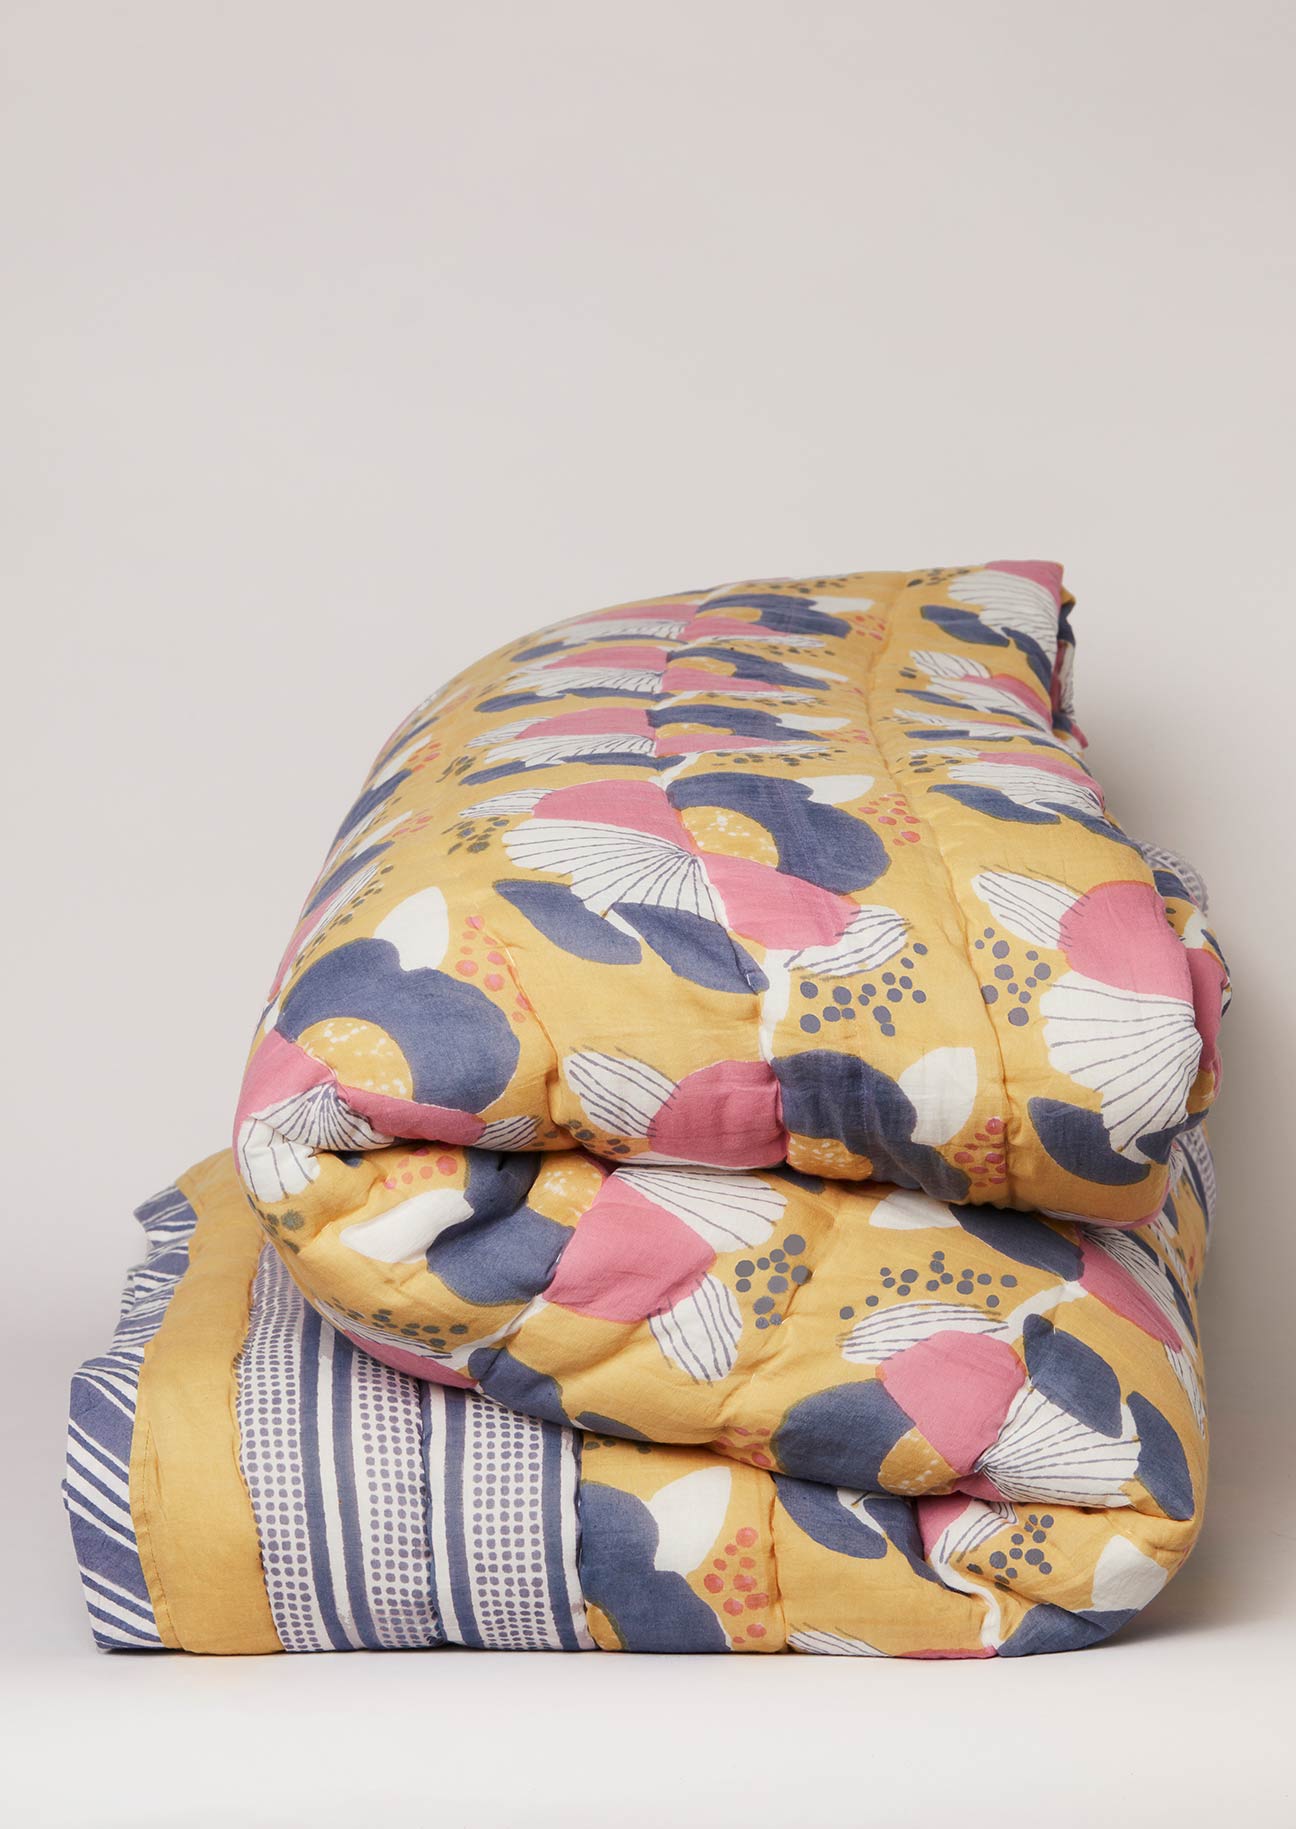 Ochre, navy and pink floral block printed quilt with stripe border.